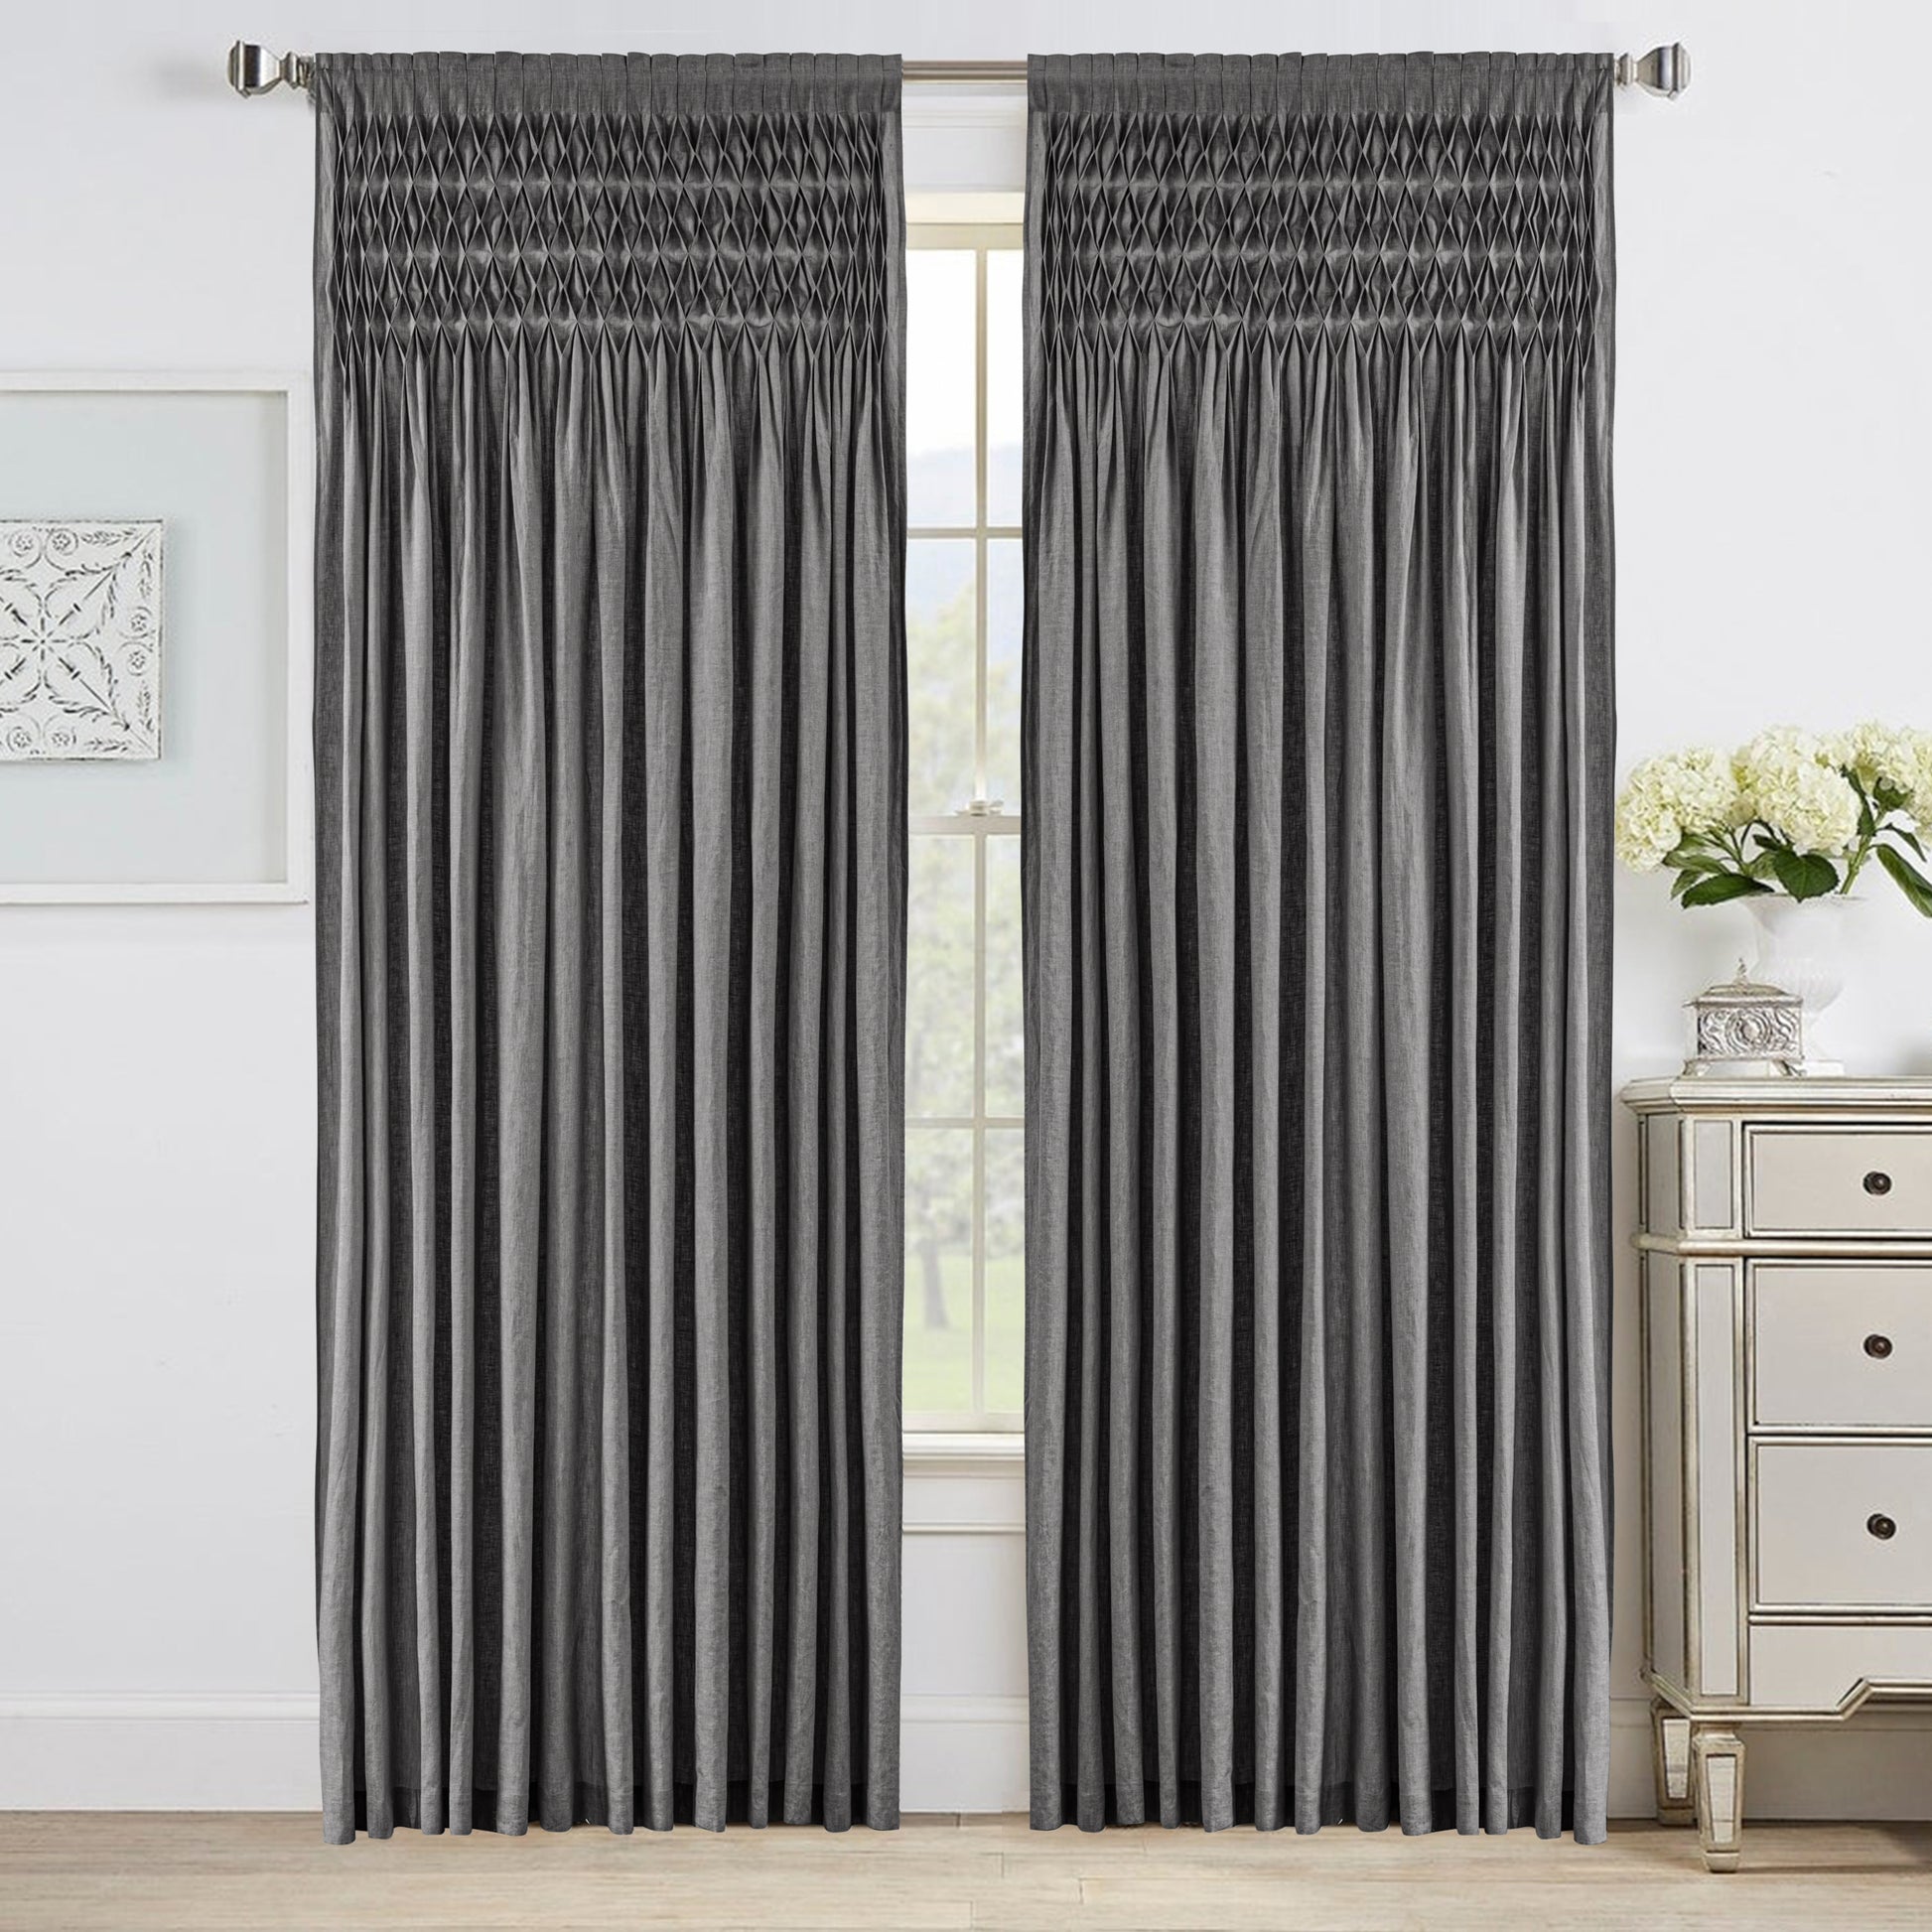 Smocked Curtains at home decor stores near you